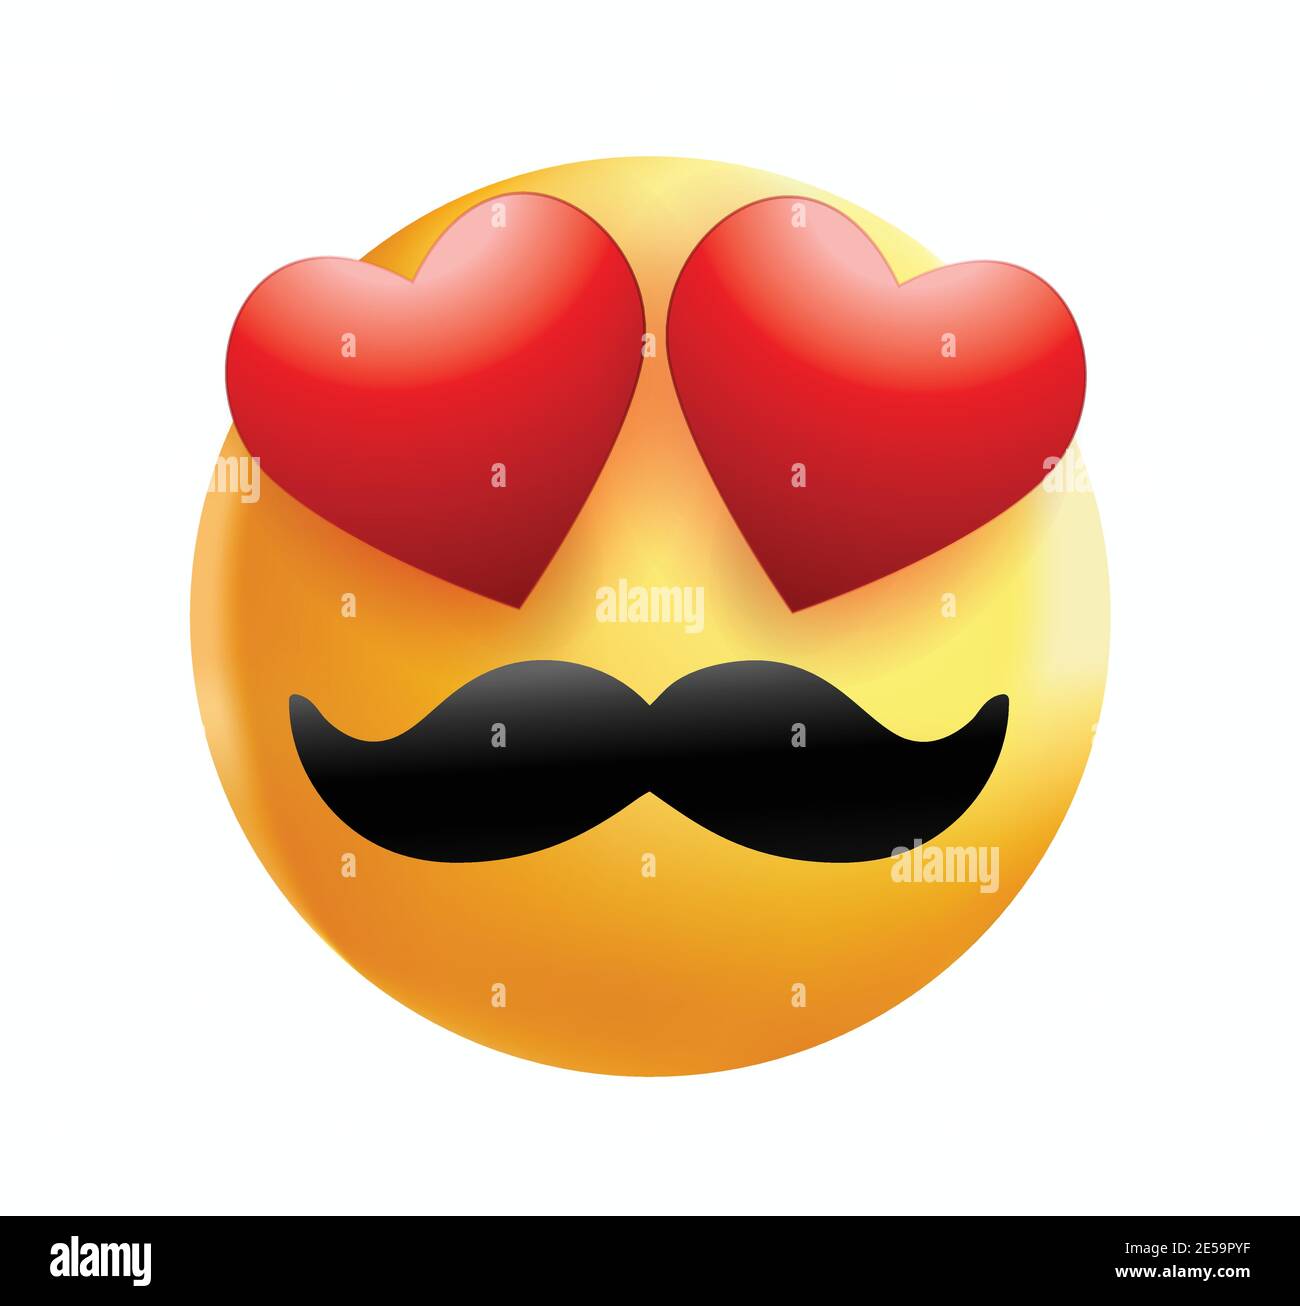 High quality mustache emoticon smiling, love emoji isolated on white background. Yellow face emoji with red heart eyes and mustache vector illustratio. Stock Vector